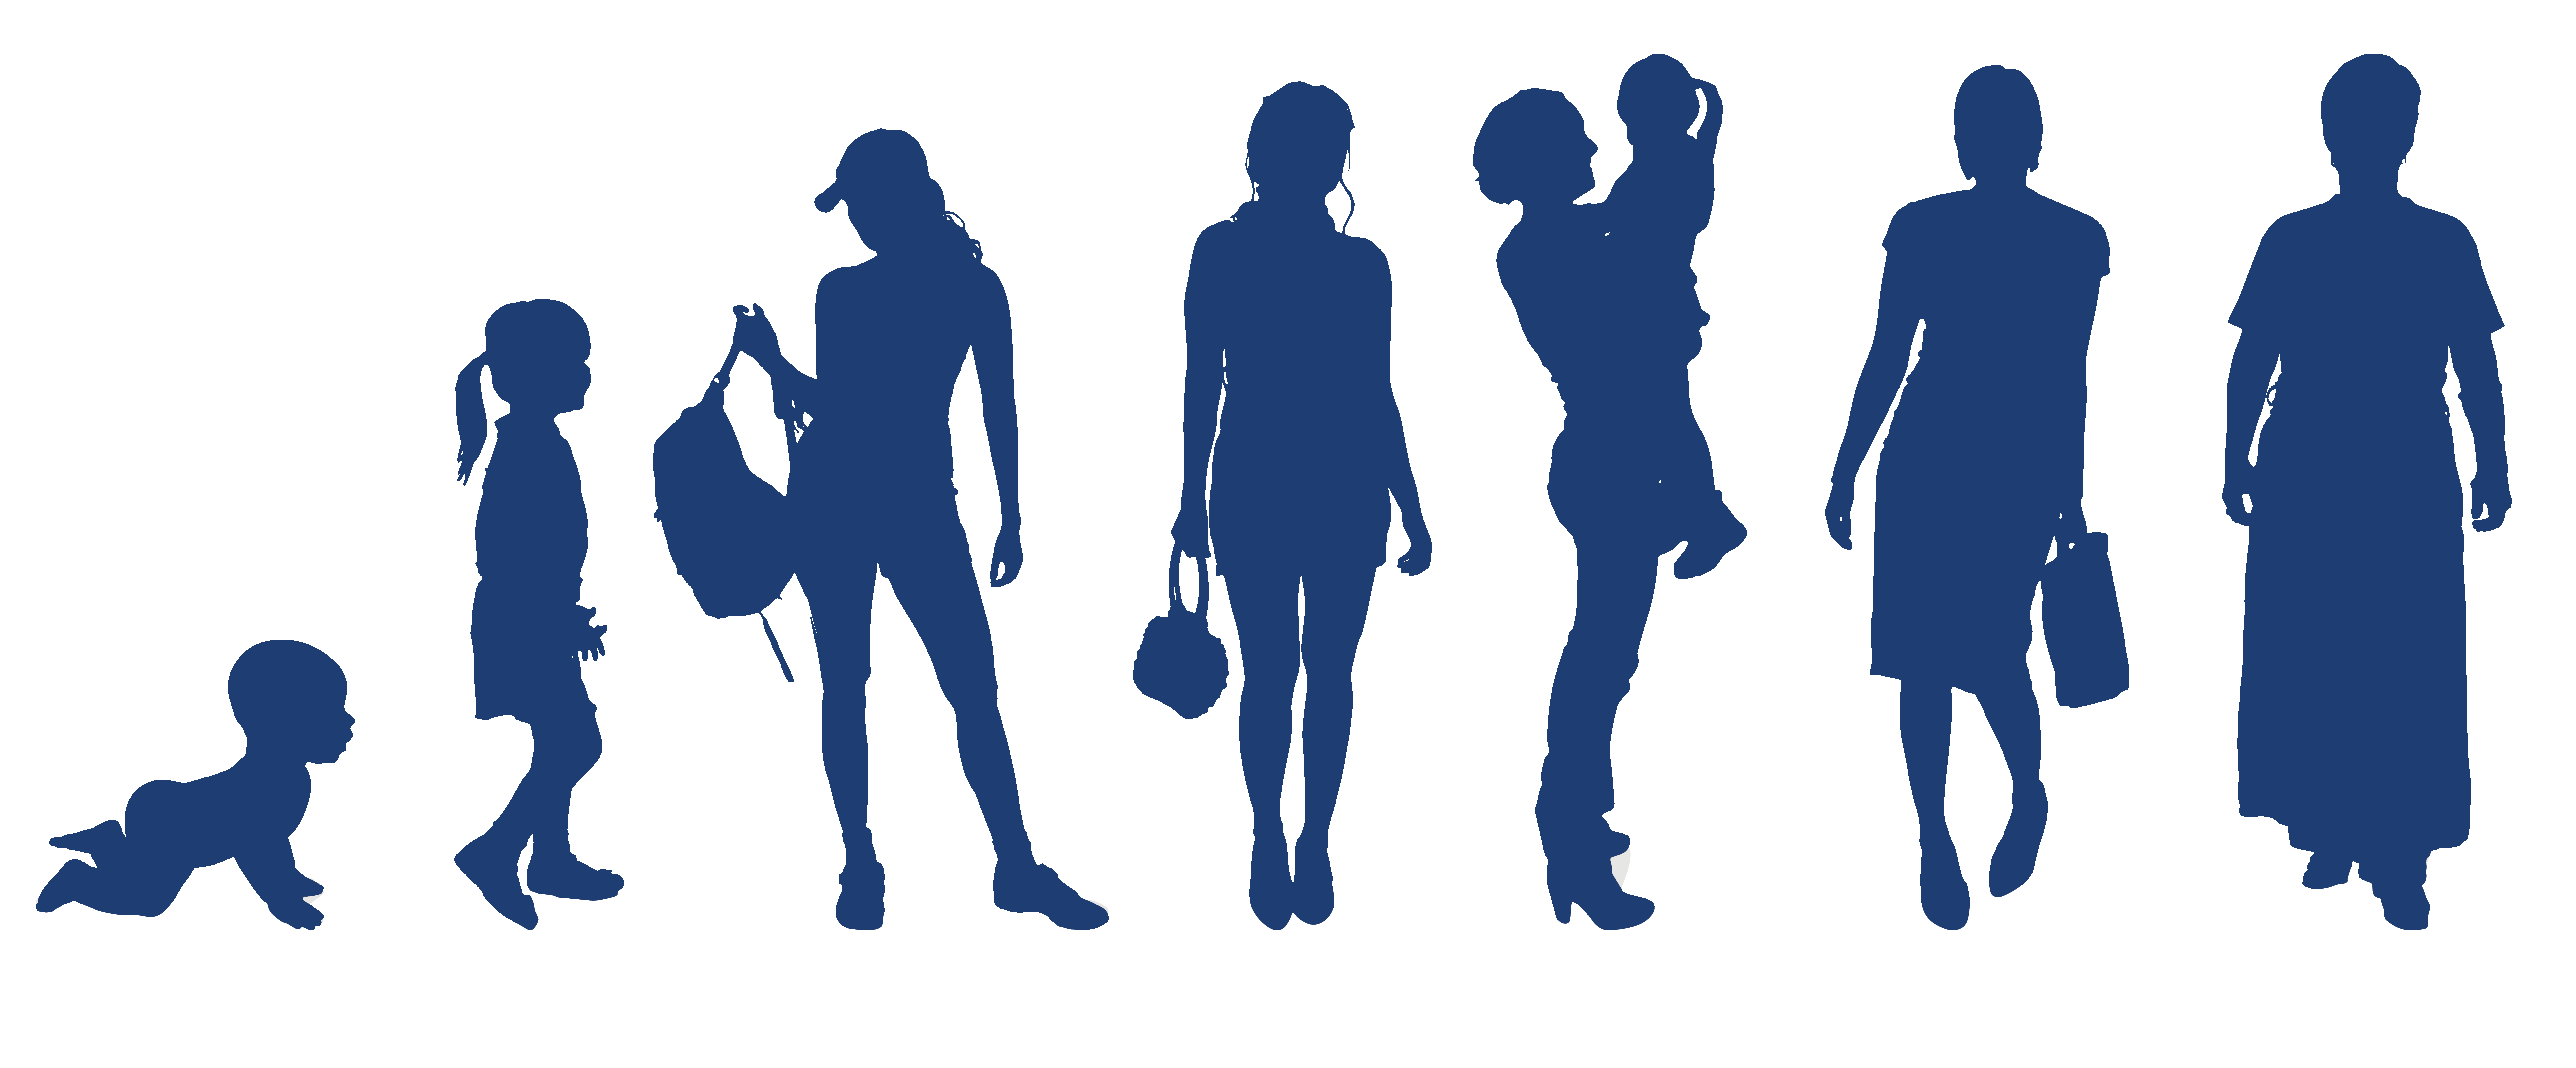 An icon graphic showing the different life stages of a woman